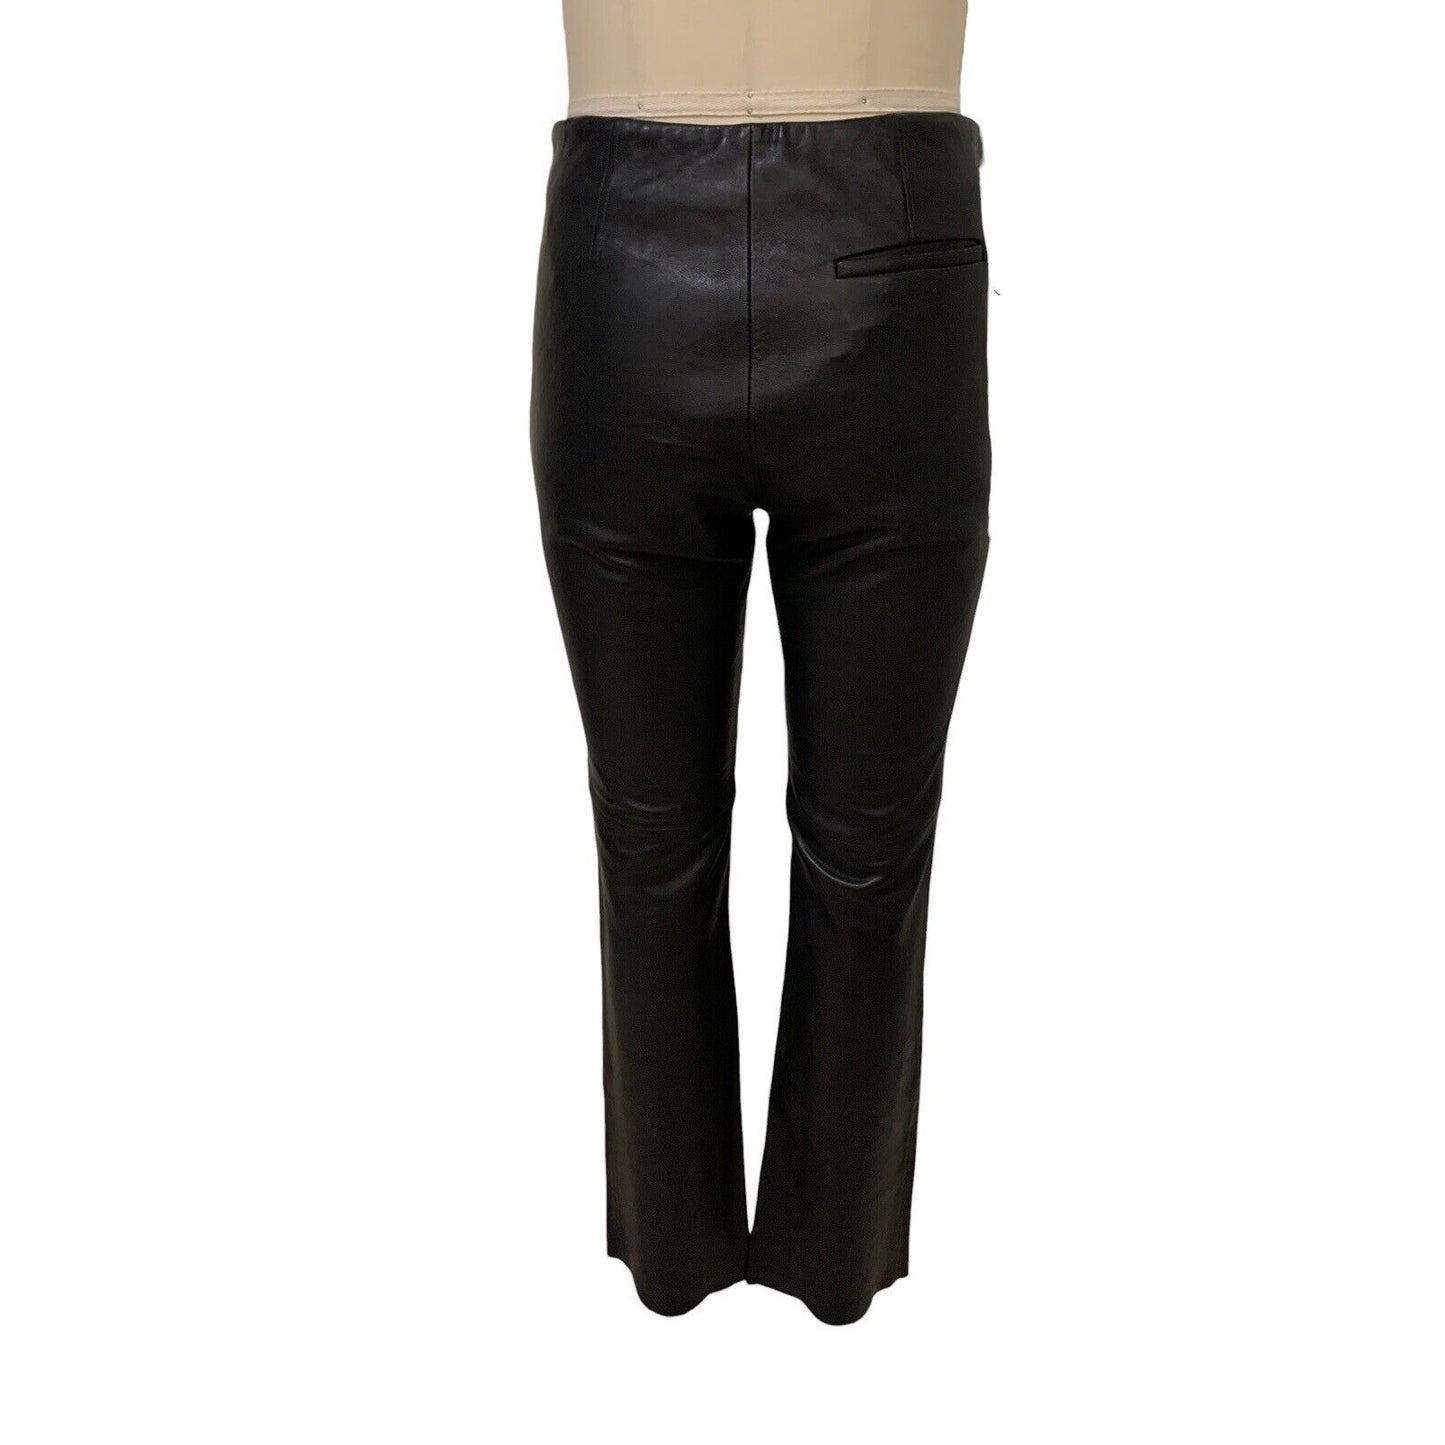 Back View Of Women's Lambskin Leather Pant